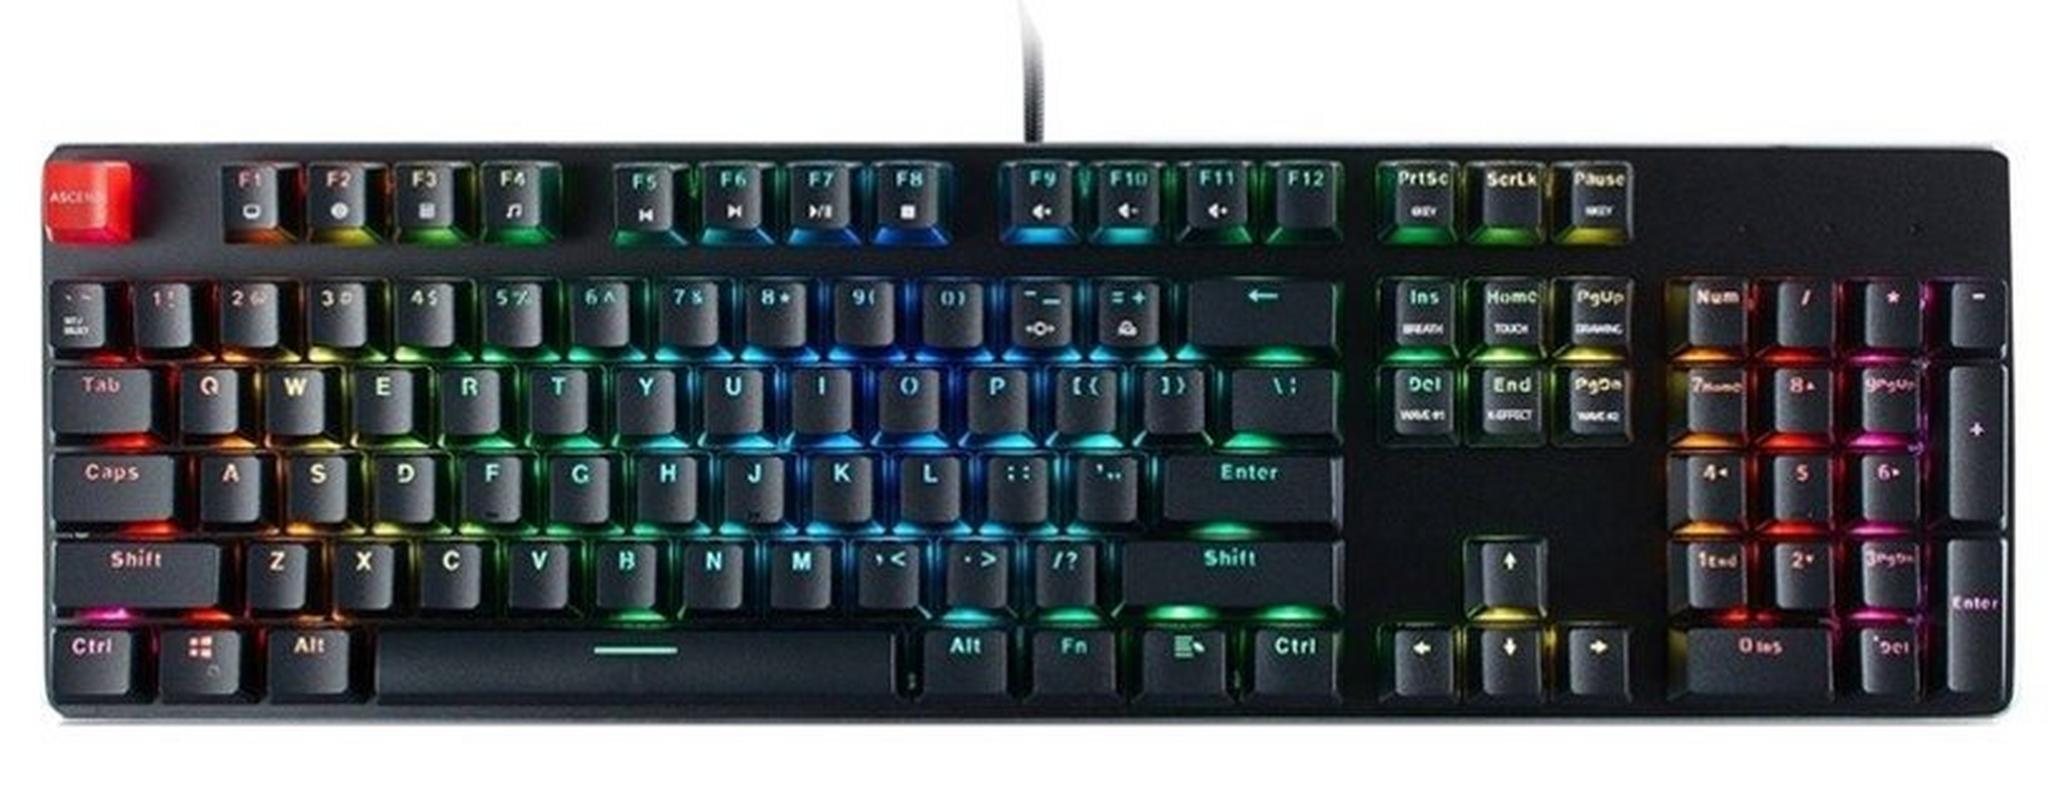 Glorious Wired Gaming Keyboard GMMK - Full Size (Pre-Built)